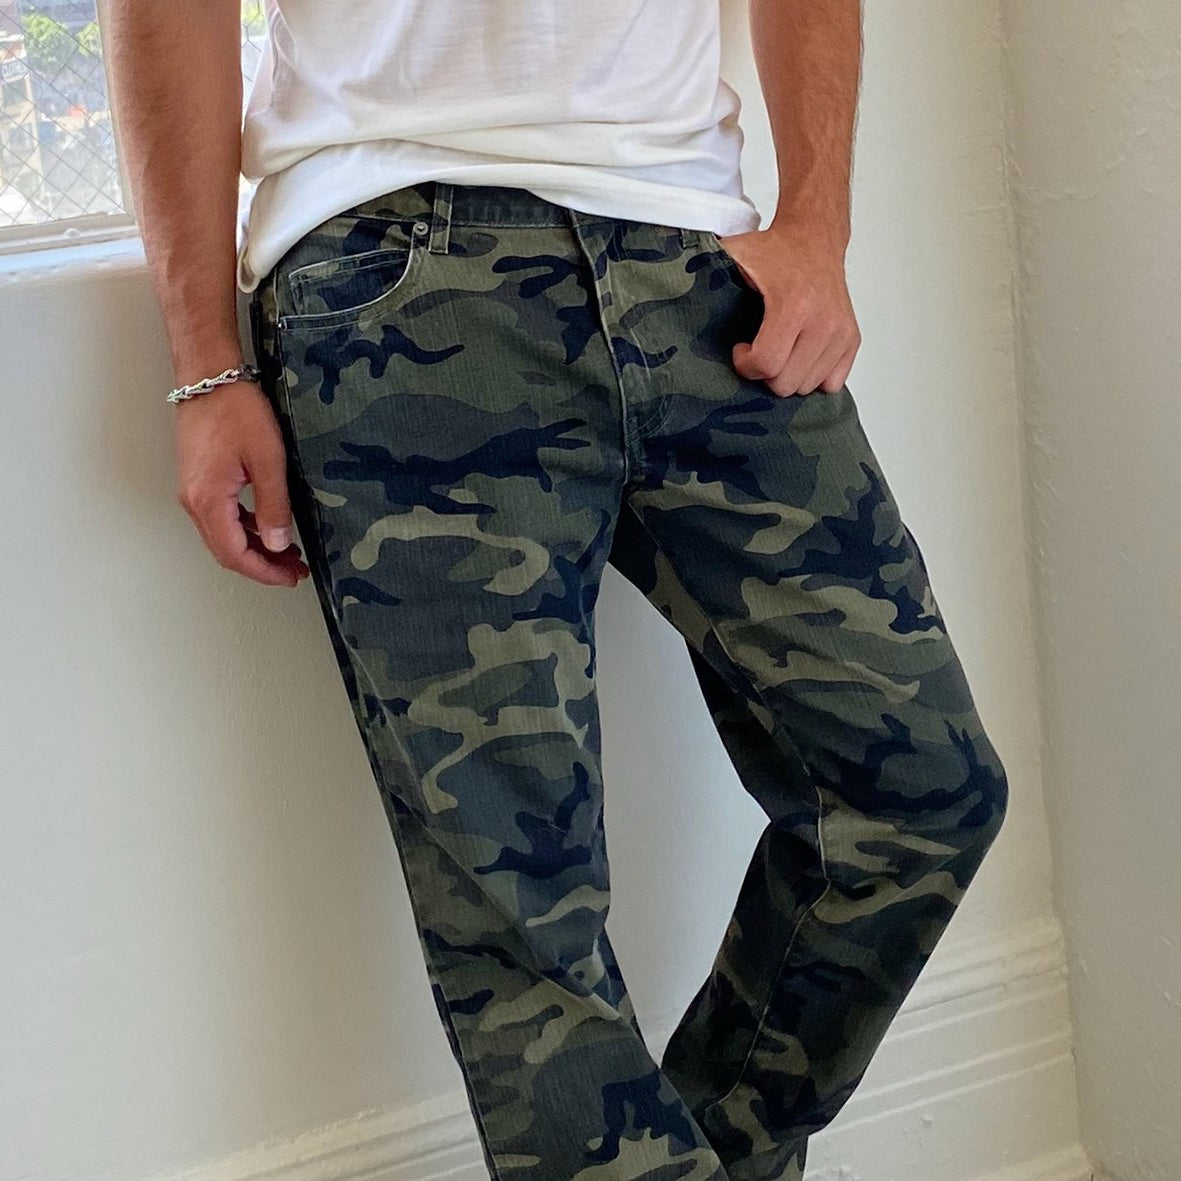 herhaling op vakantie dienblad The Best Travel Jeans in the World for Men | Camo | Made in the USA -  Aviator